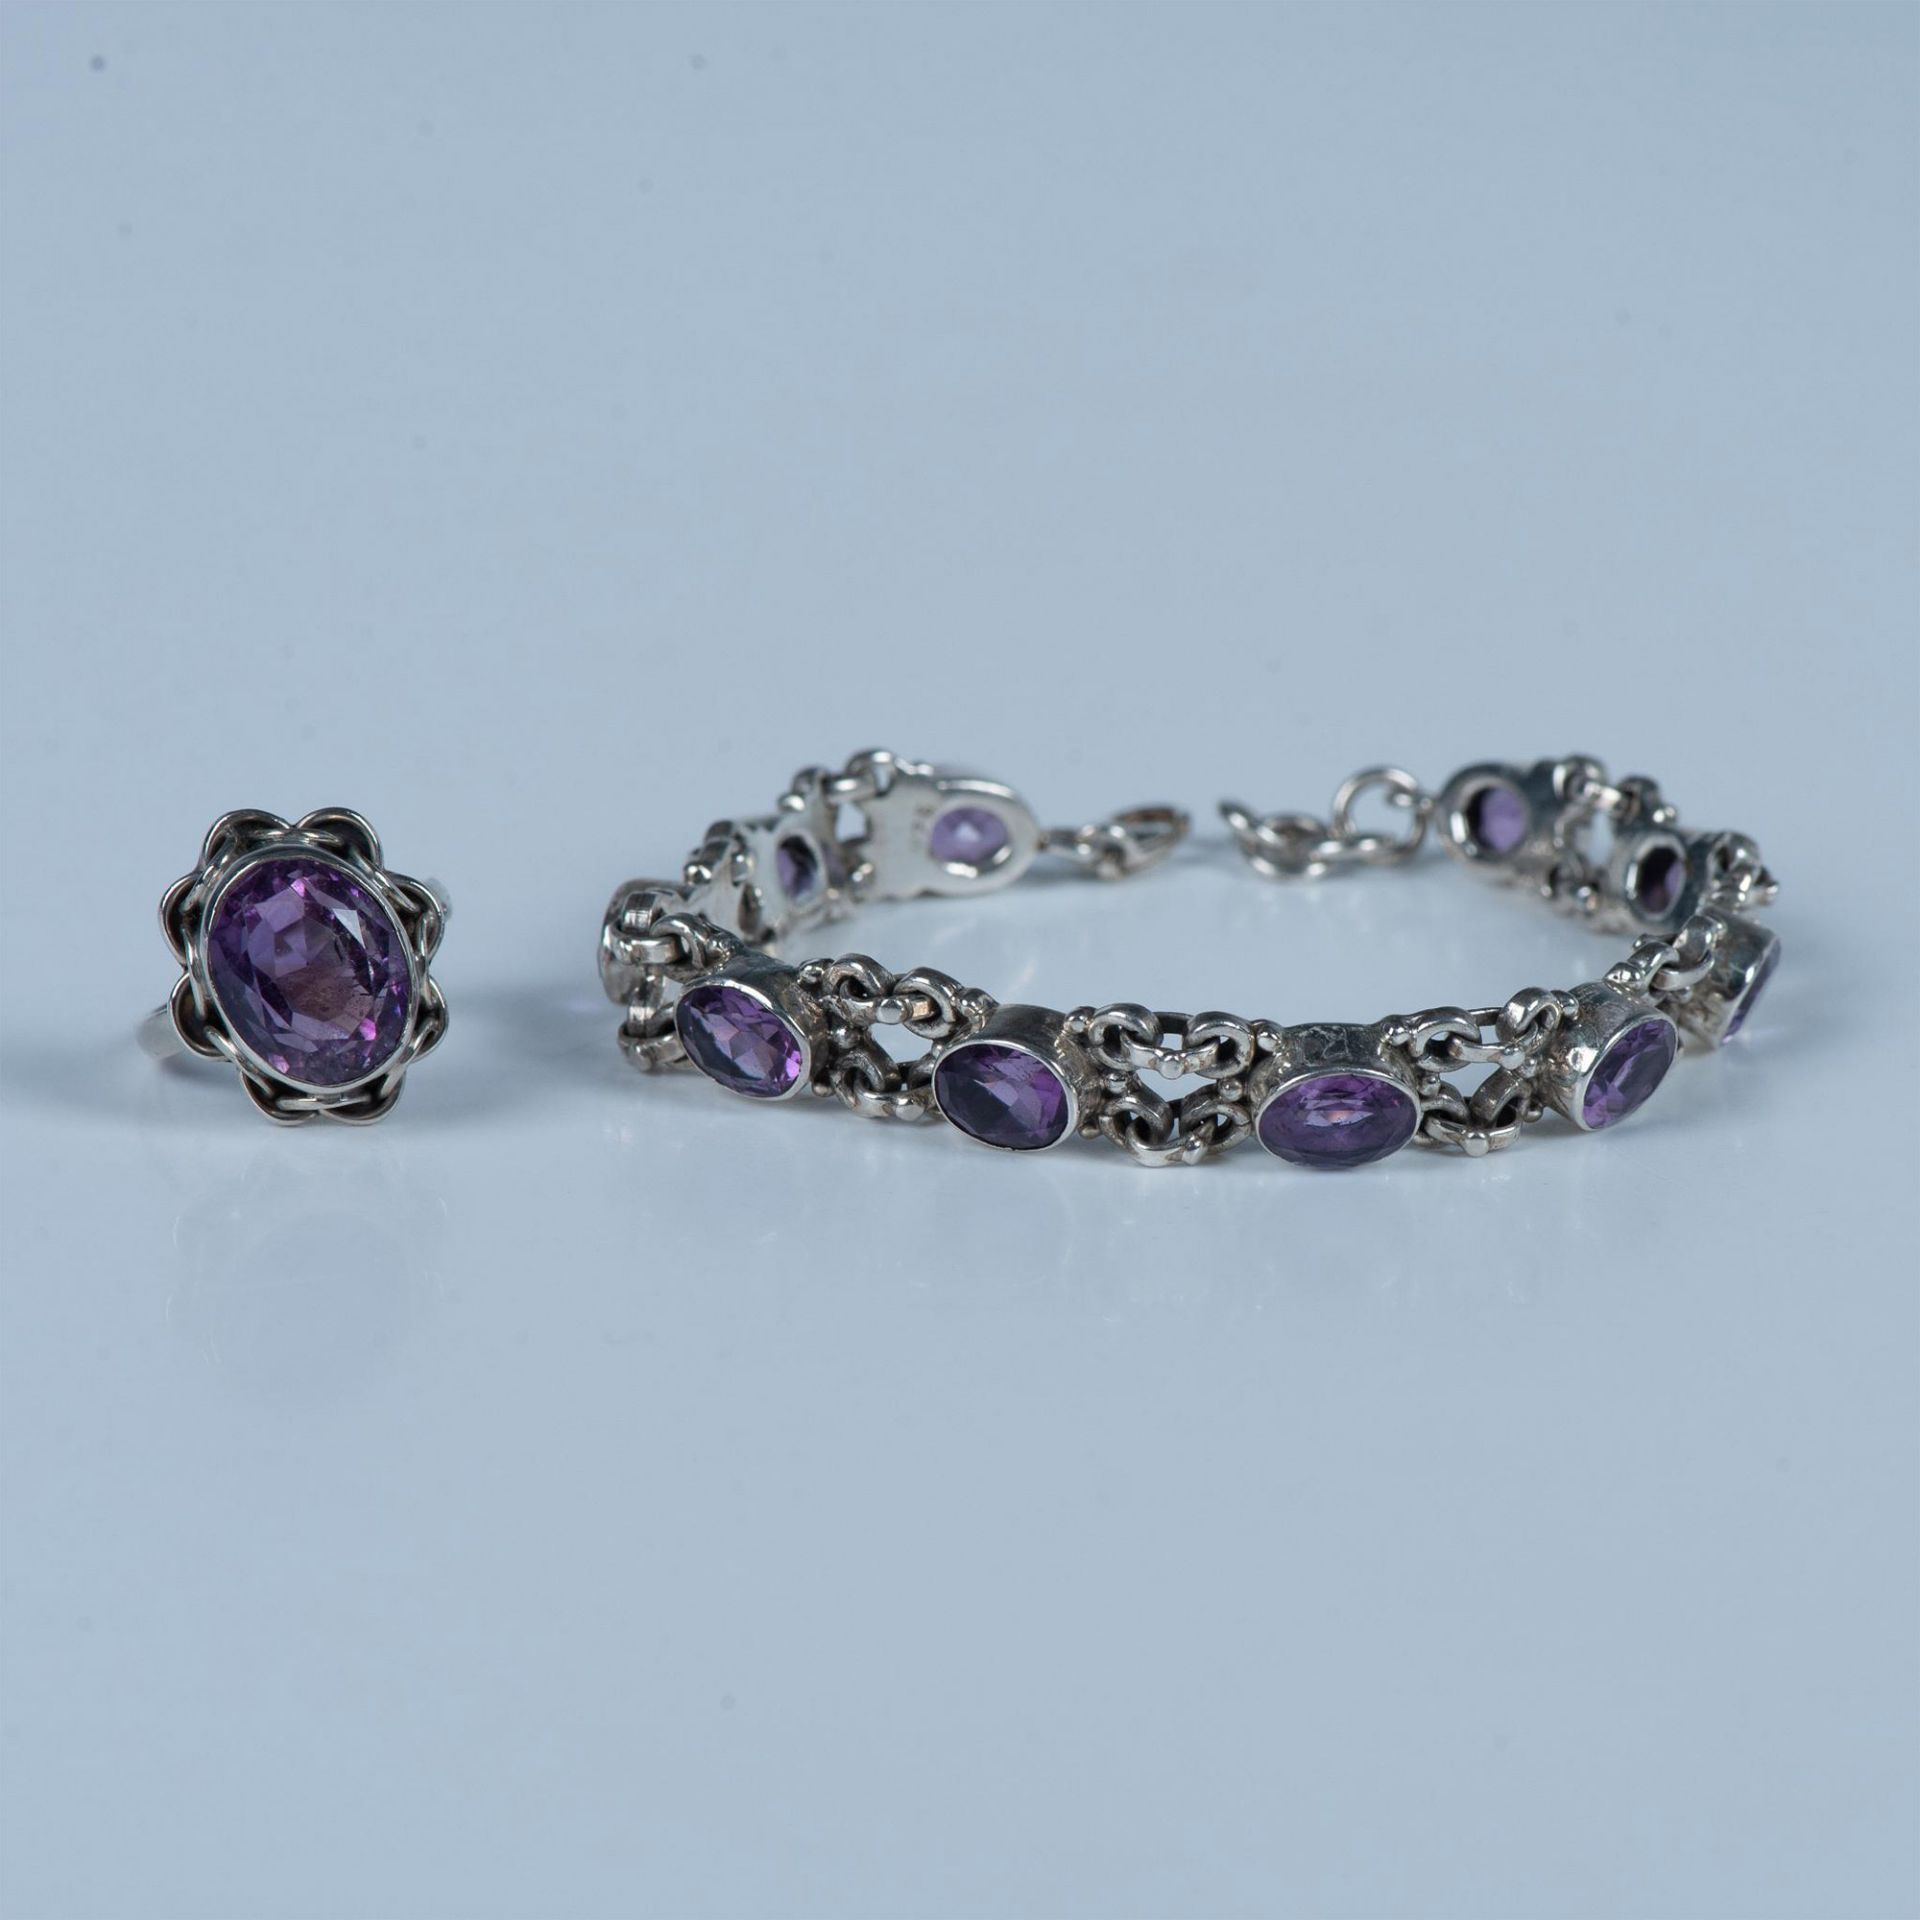 2pc Gorgeous Sterling Silver and Amethyst Ring & Bracelet